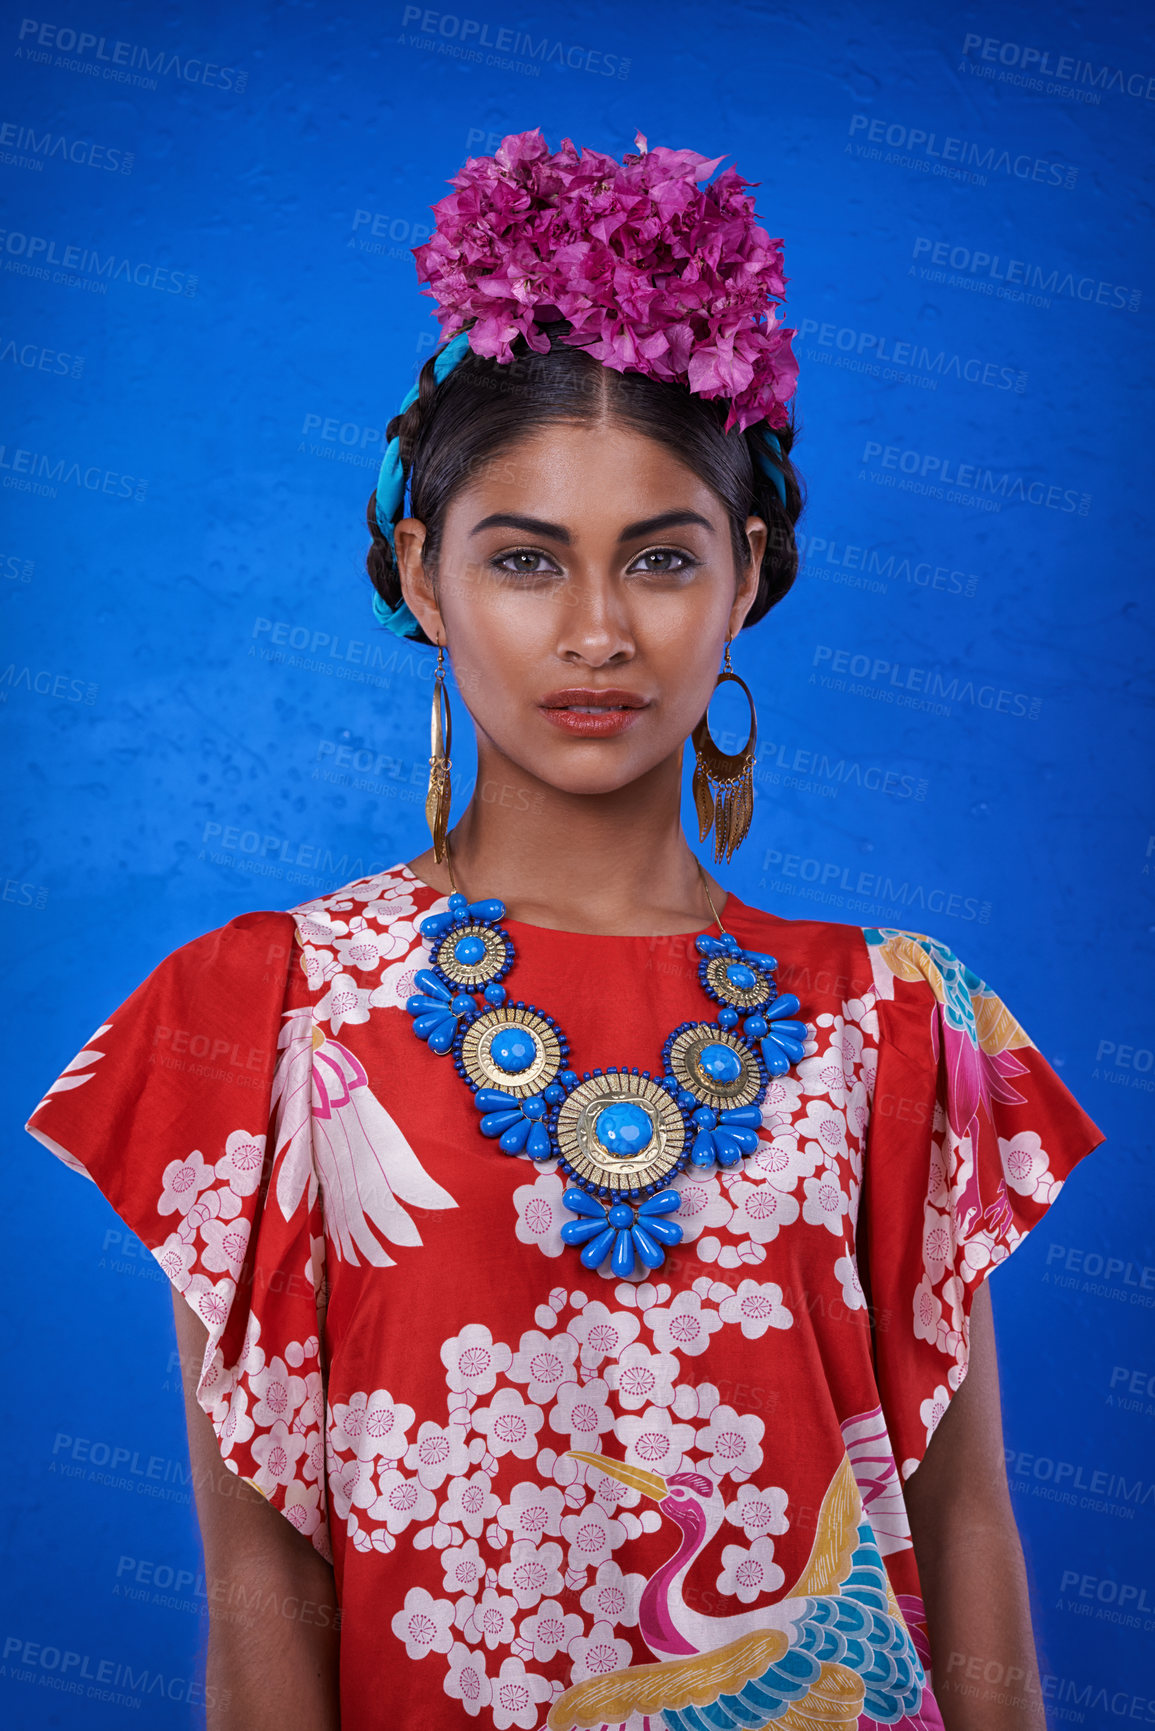 Buy stock photo A beautiful young woman wearing traditional cultural attire